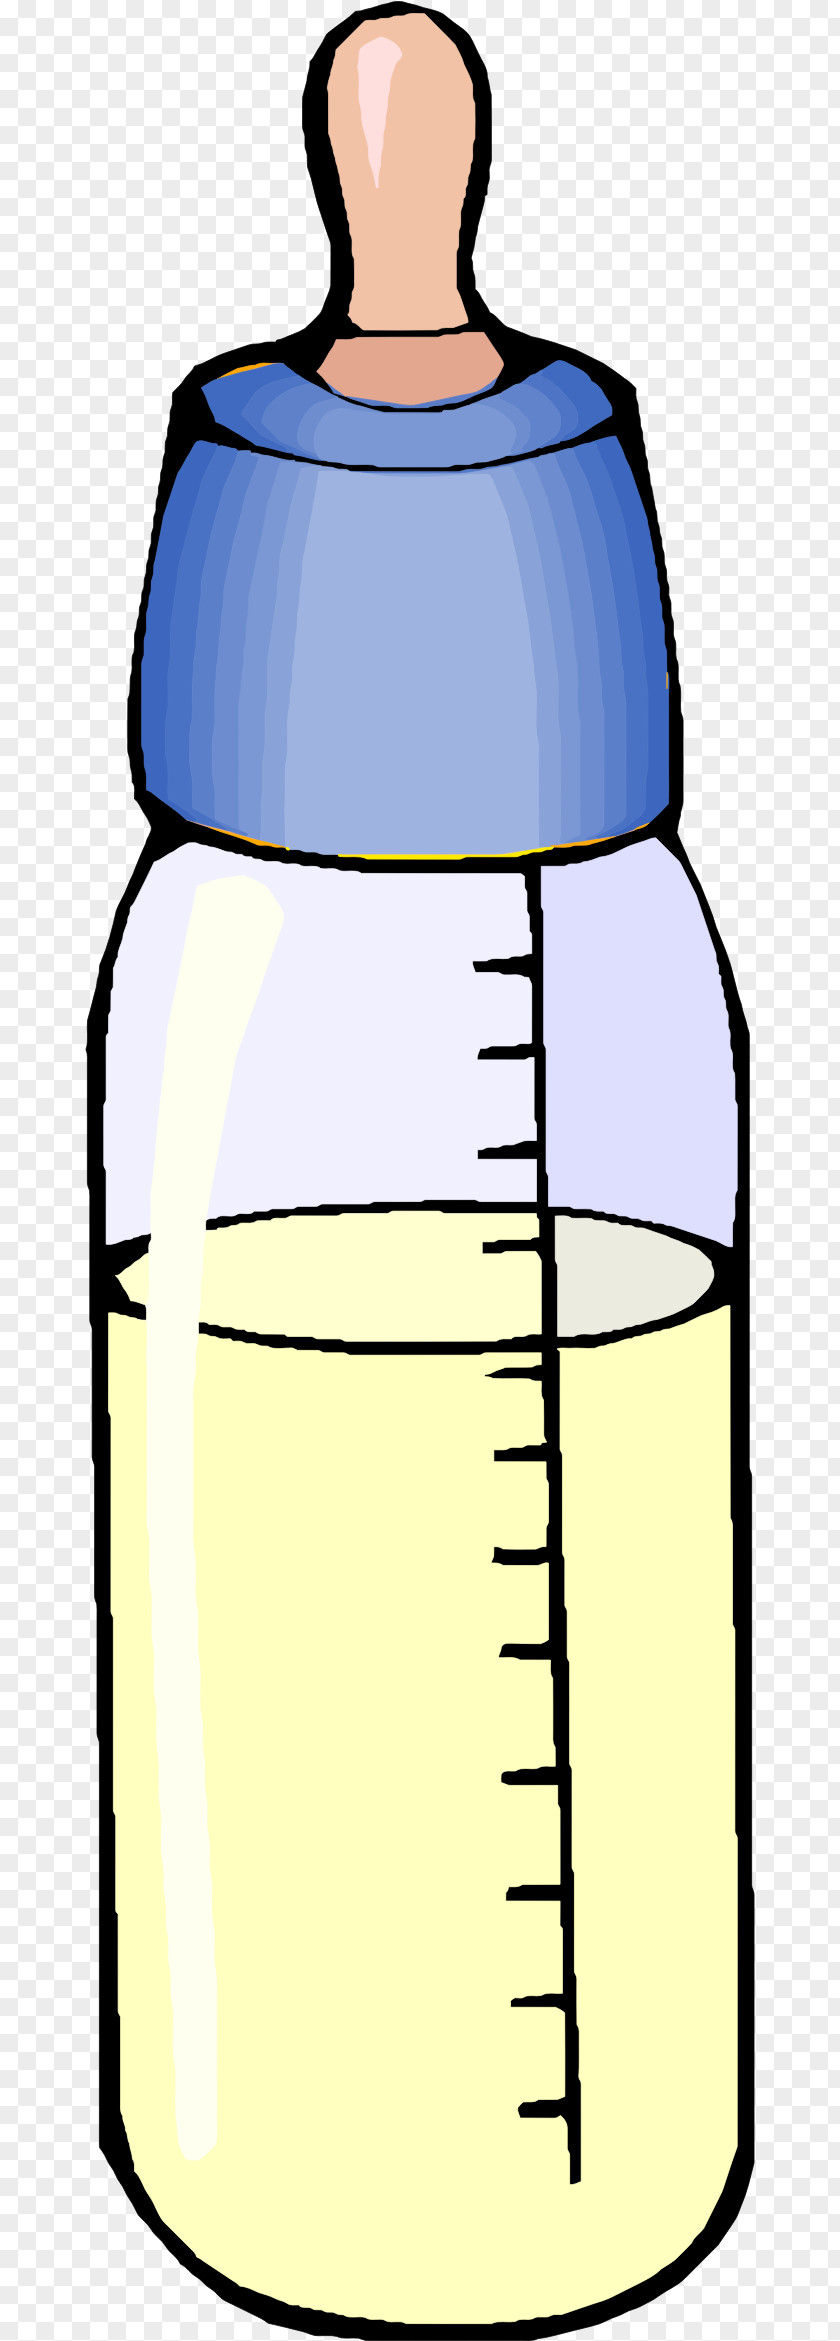 The Baby To Drink Milk Bottles Infant Clip Art PNG